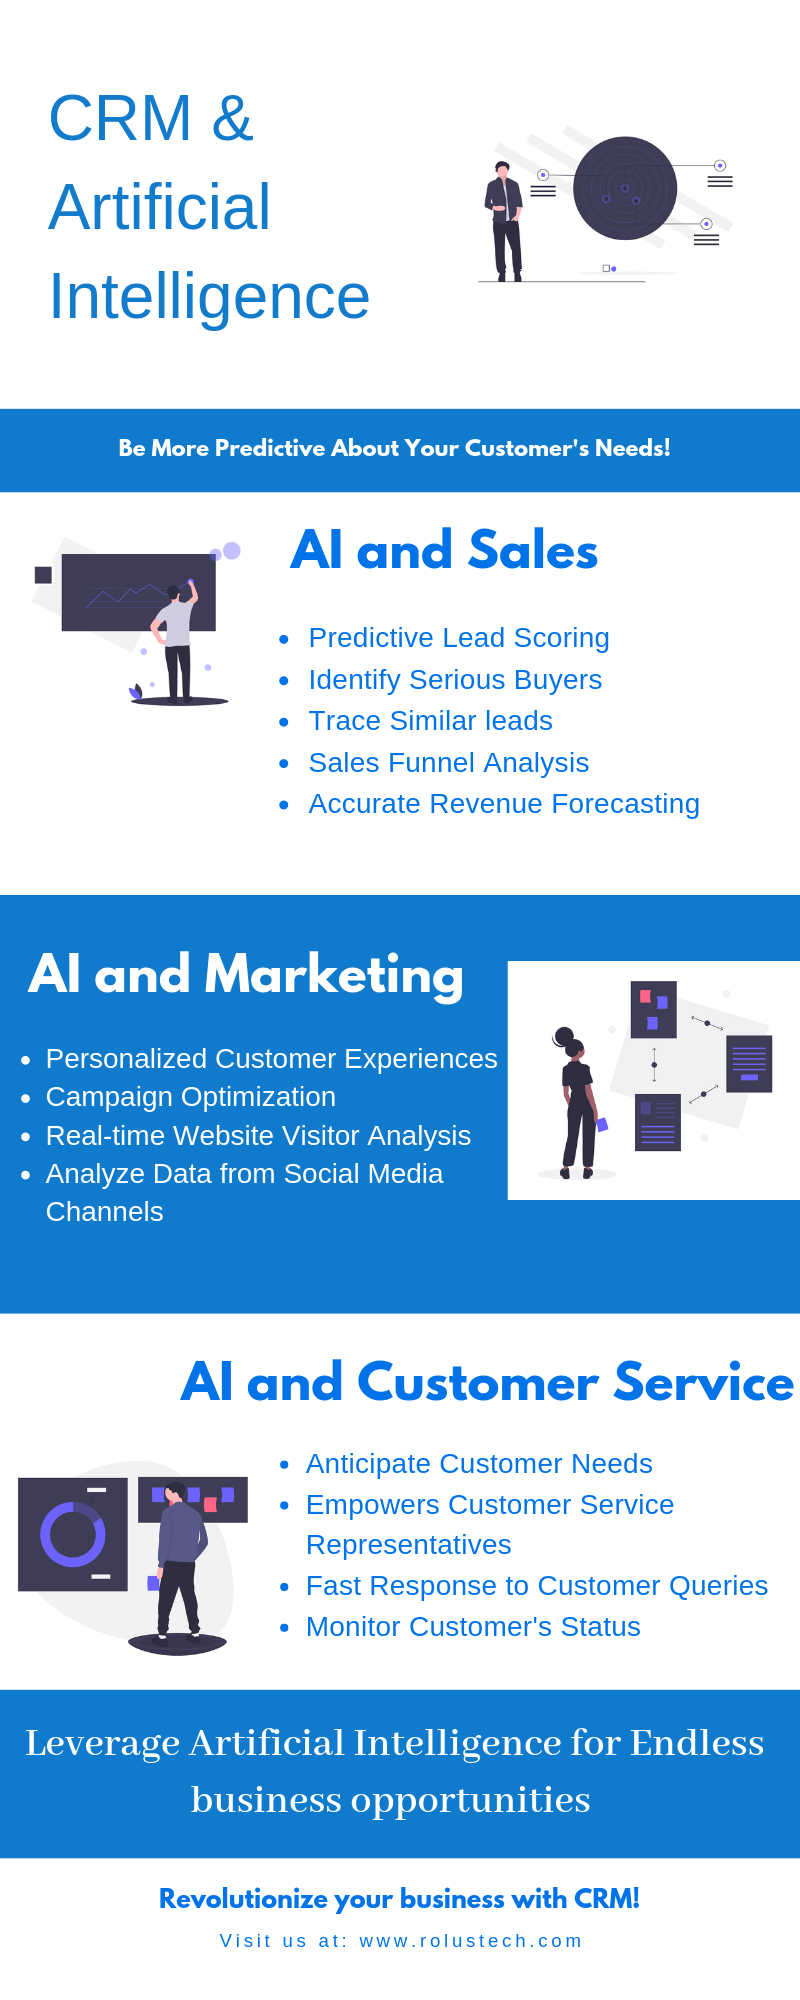 Artificial Intelligence and the future of CRM